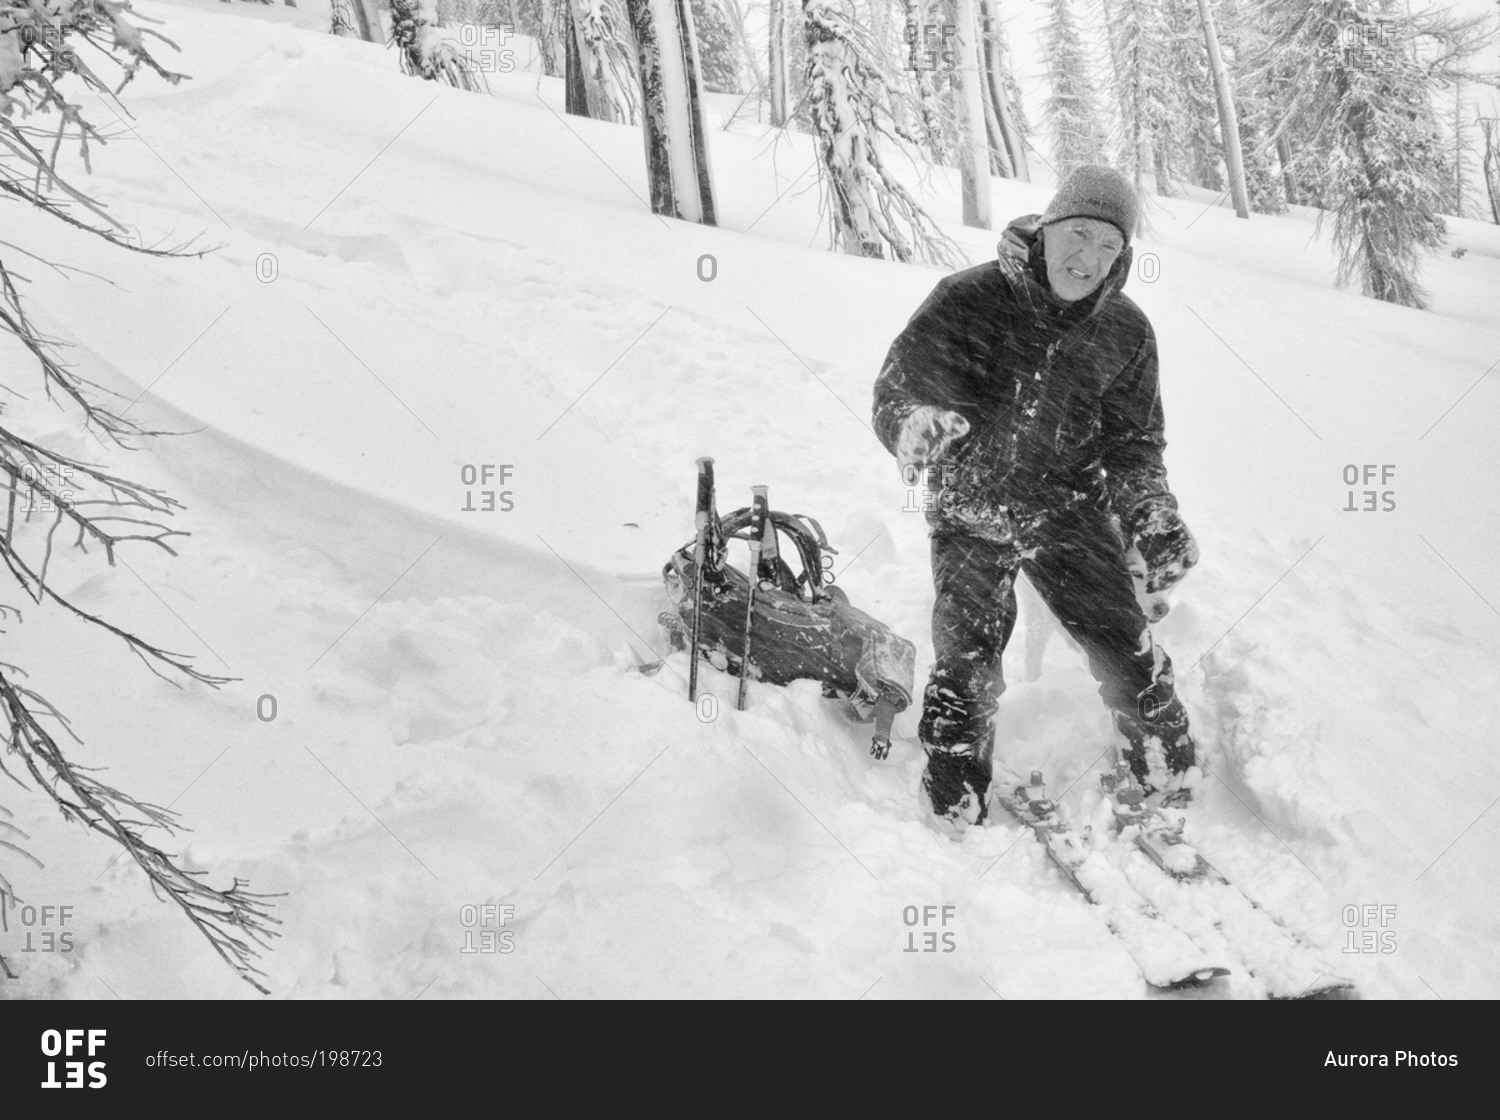 A backcountry skier suffers in blowing wind and cold temperatures during the change over in the Bitterroot Mountains near Victor, Montana